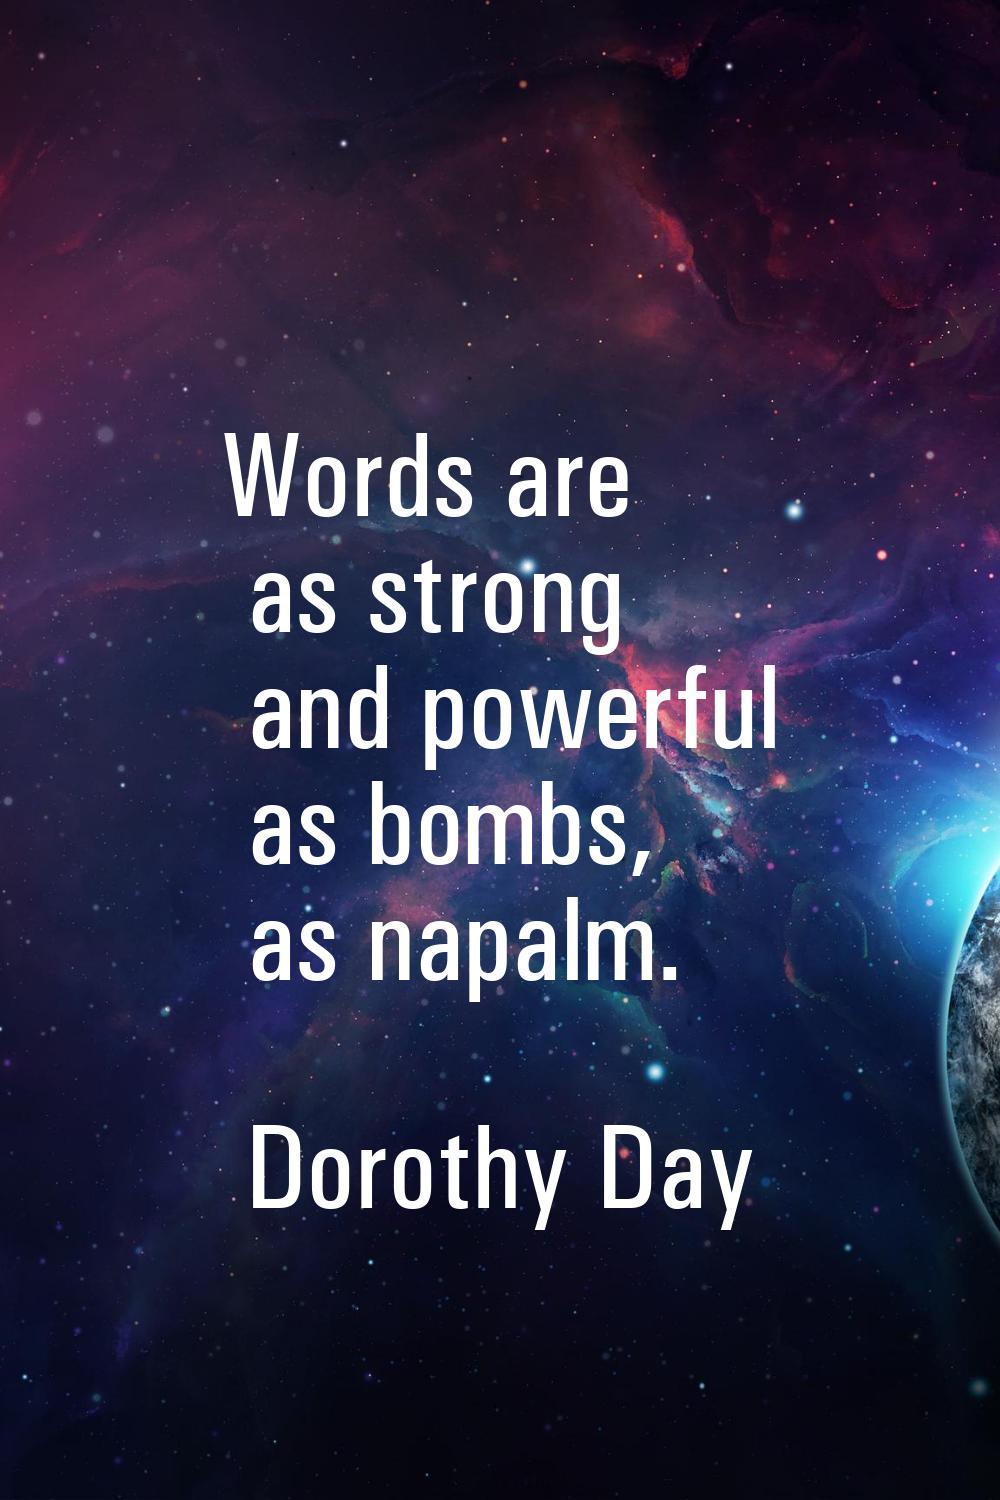 Words are as strong and powerful as bombs, as napalm.